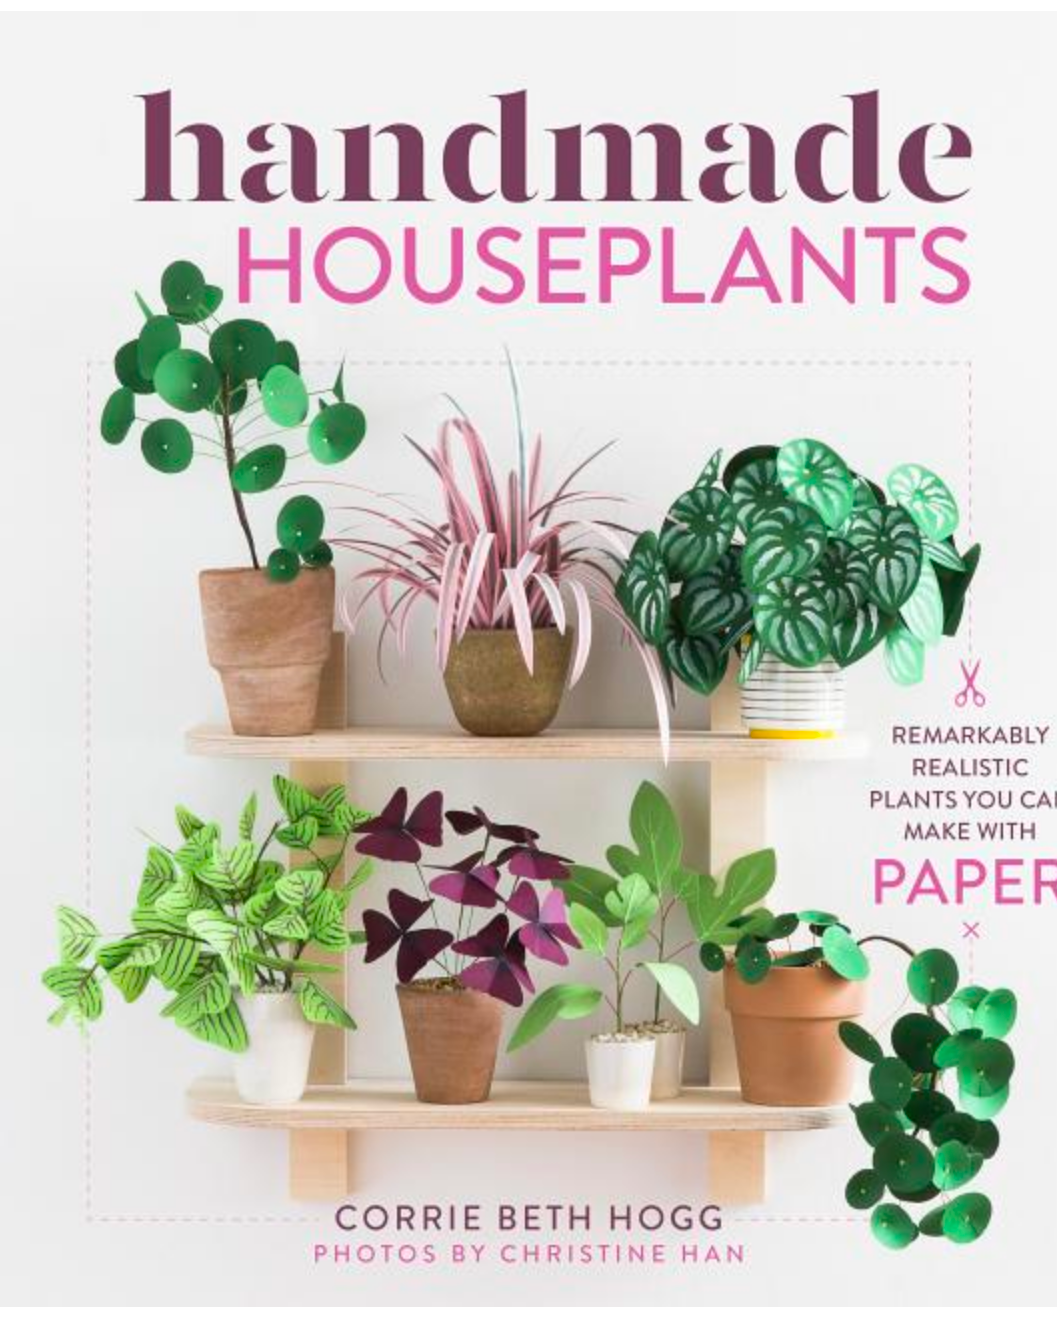 Handmade Houseplants: Remarkably Realistic Plants You Can Make with Paper - Gather Goods Co - Raleigh, NC